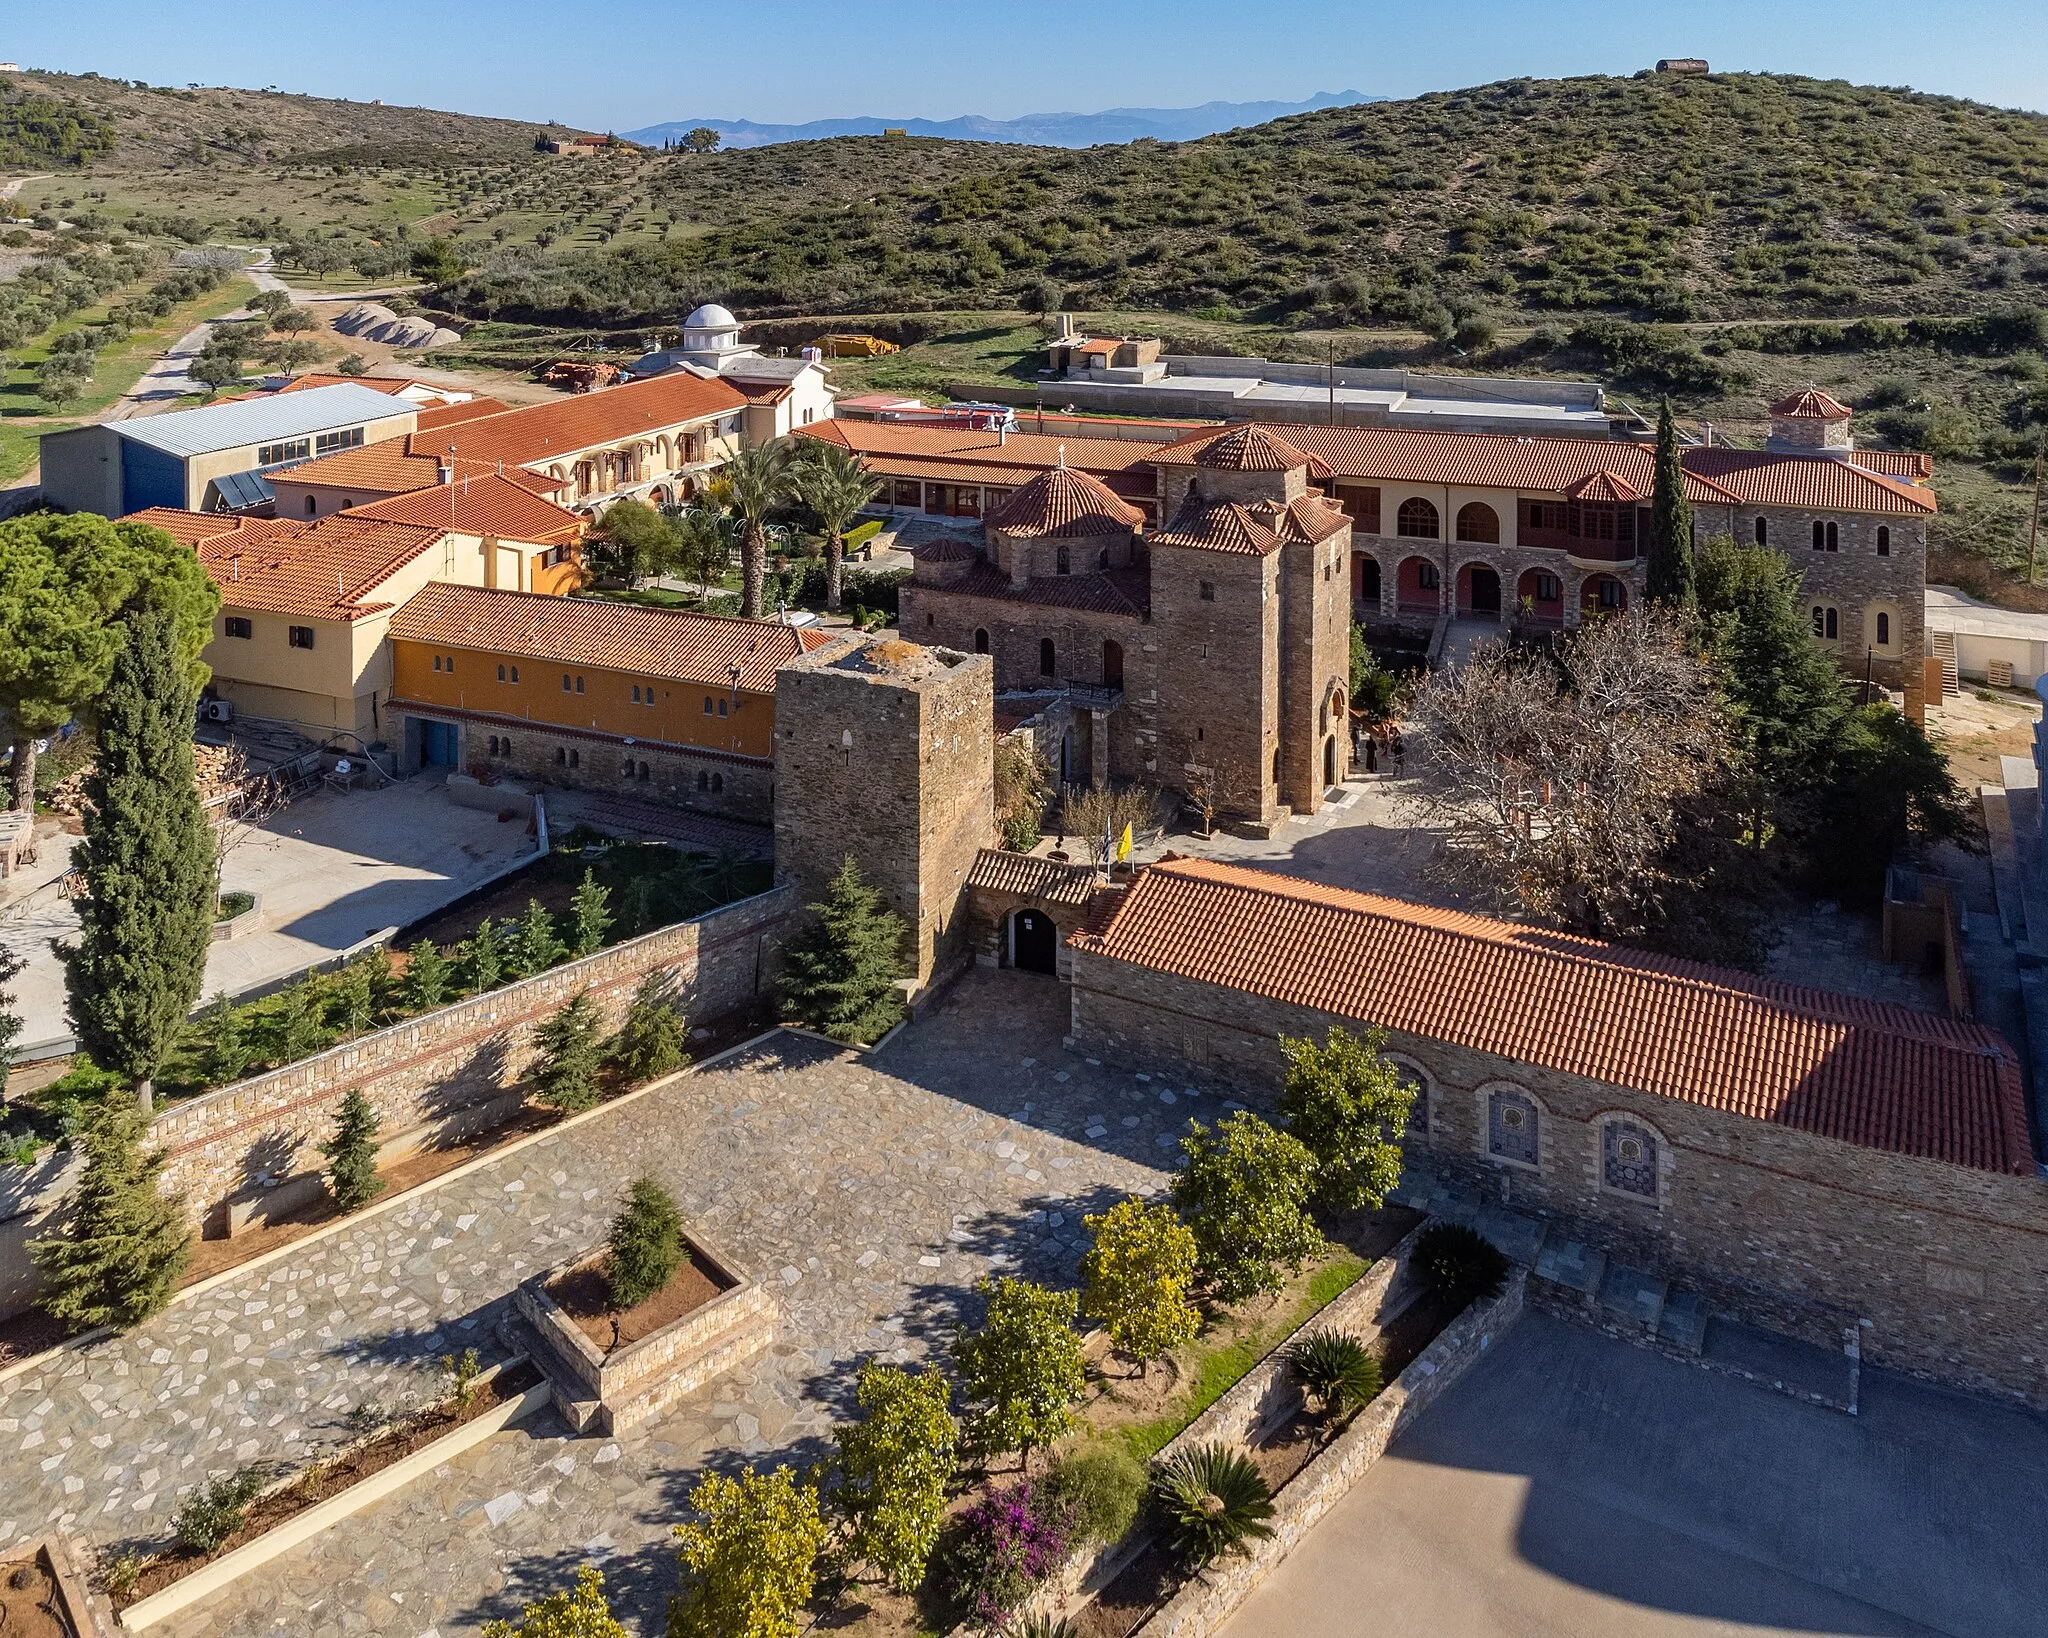 Photo showing: Airview of Daou Penteli monastery, Attica.